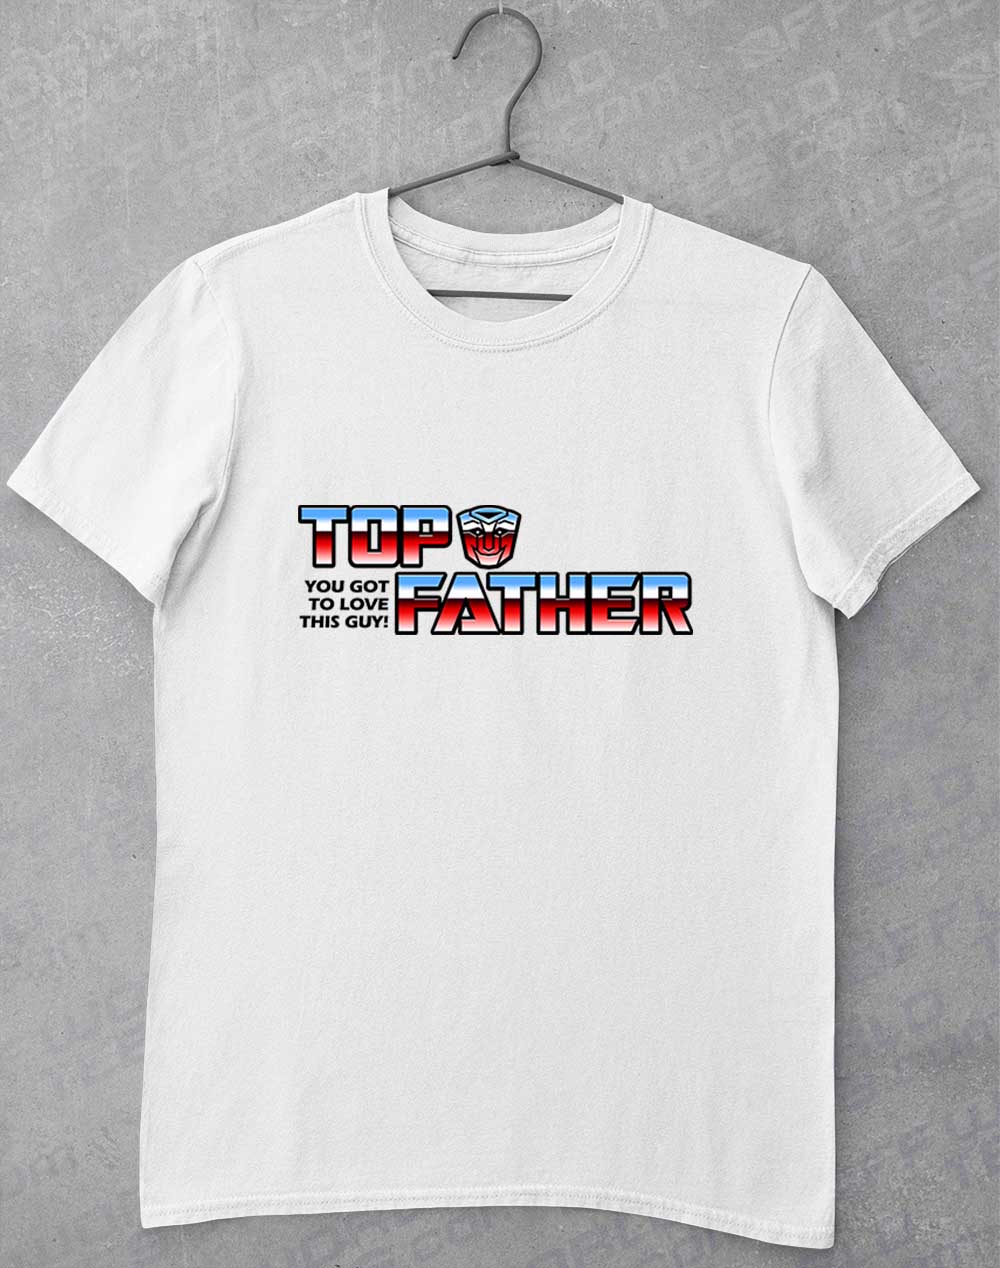 White - Top Father T-Shirt